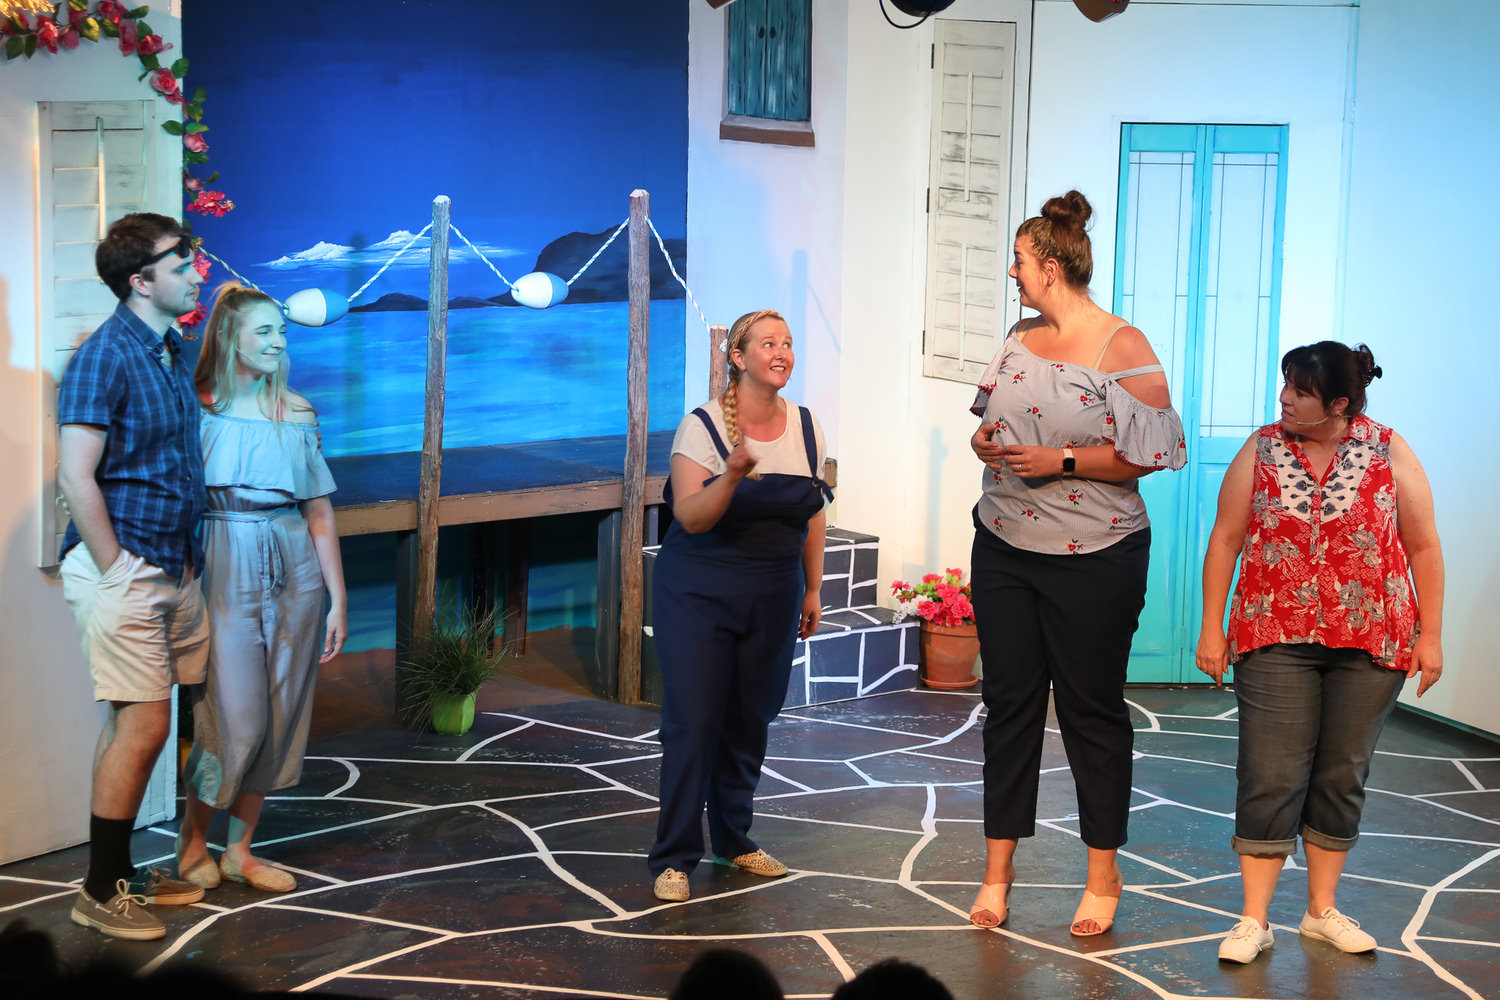 Donna (Katie Lambert) introduces Sophie (Quinlyn Ashlock) and Sky (Mychal Leverage) to Rosie (Susan Gibson) and Tanya (Hayley Hinckley).